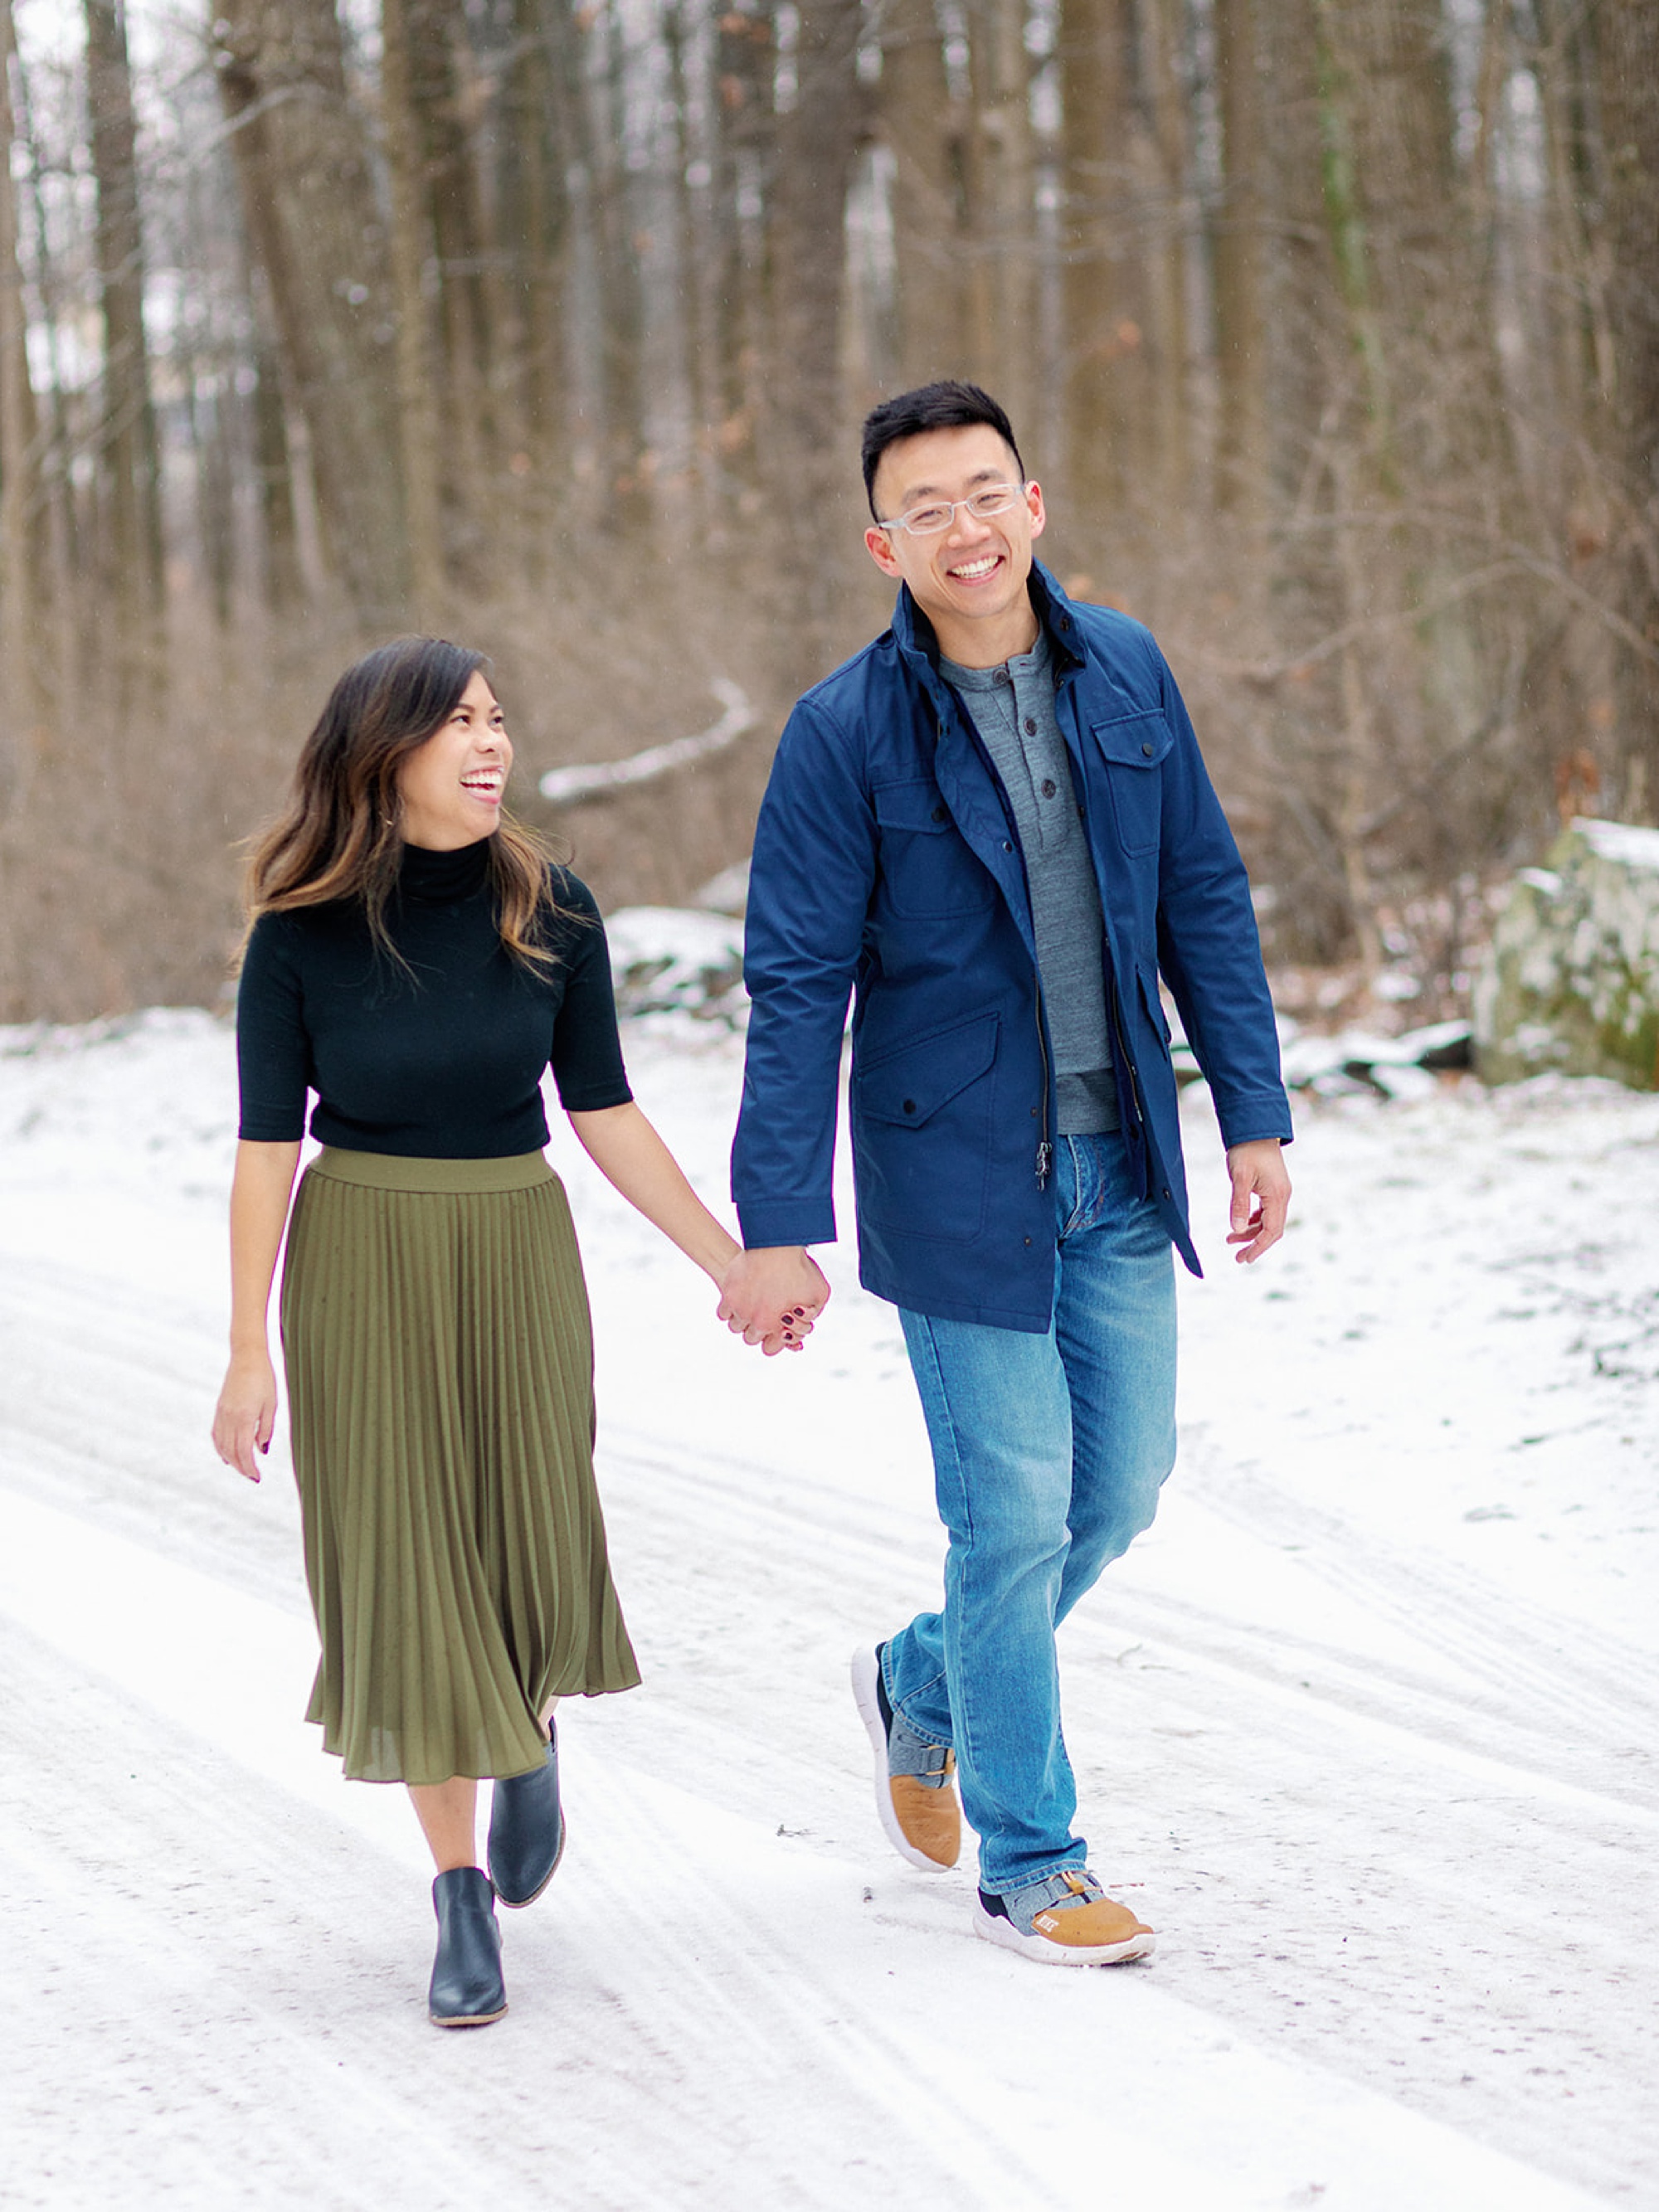 engaged couple holds hands during Snowy Engagement Session in Bluemont, VA 